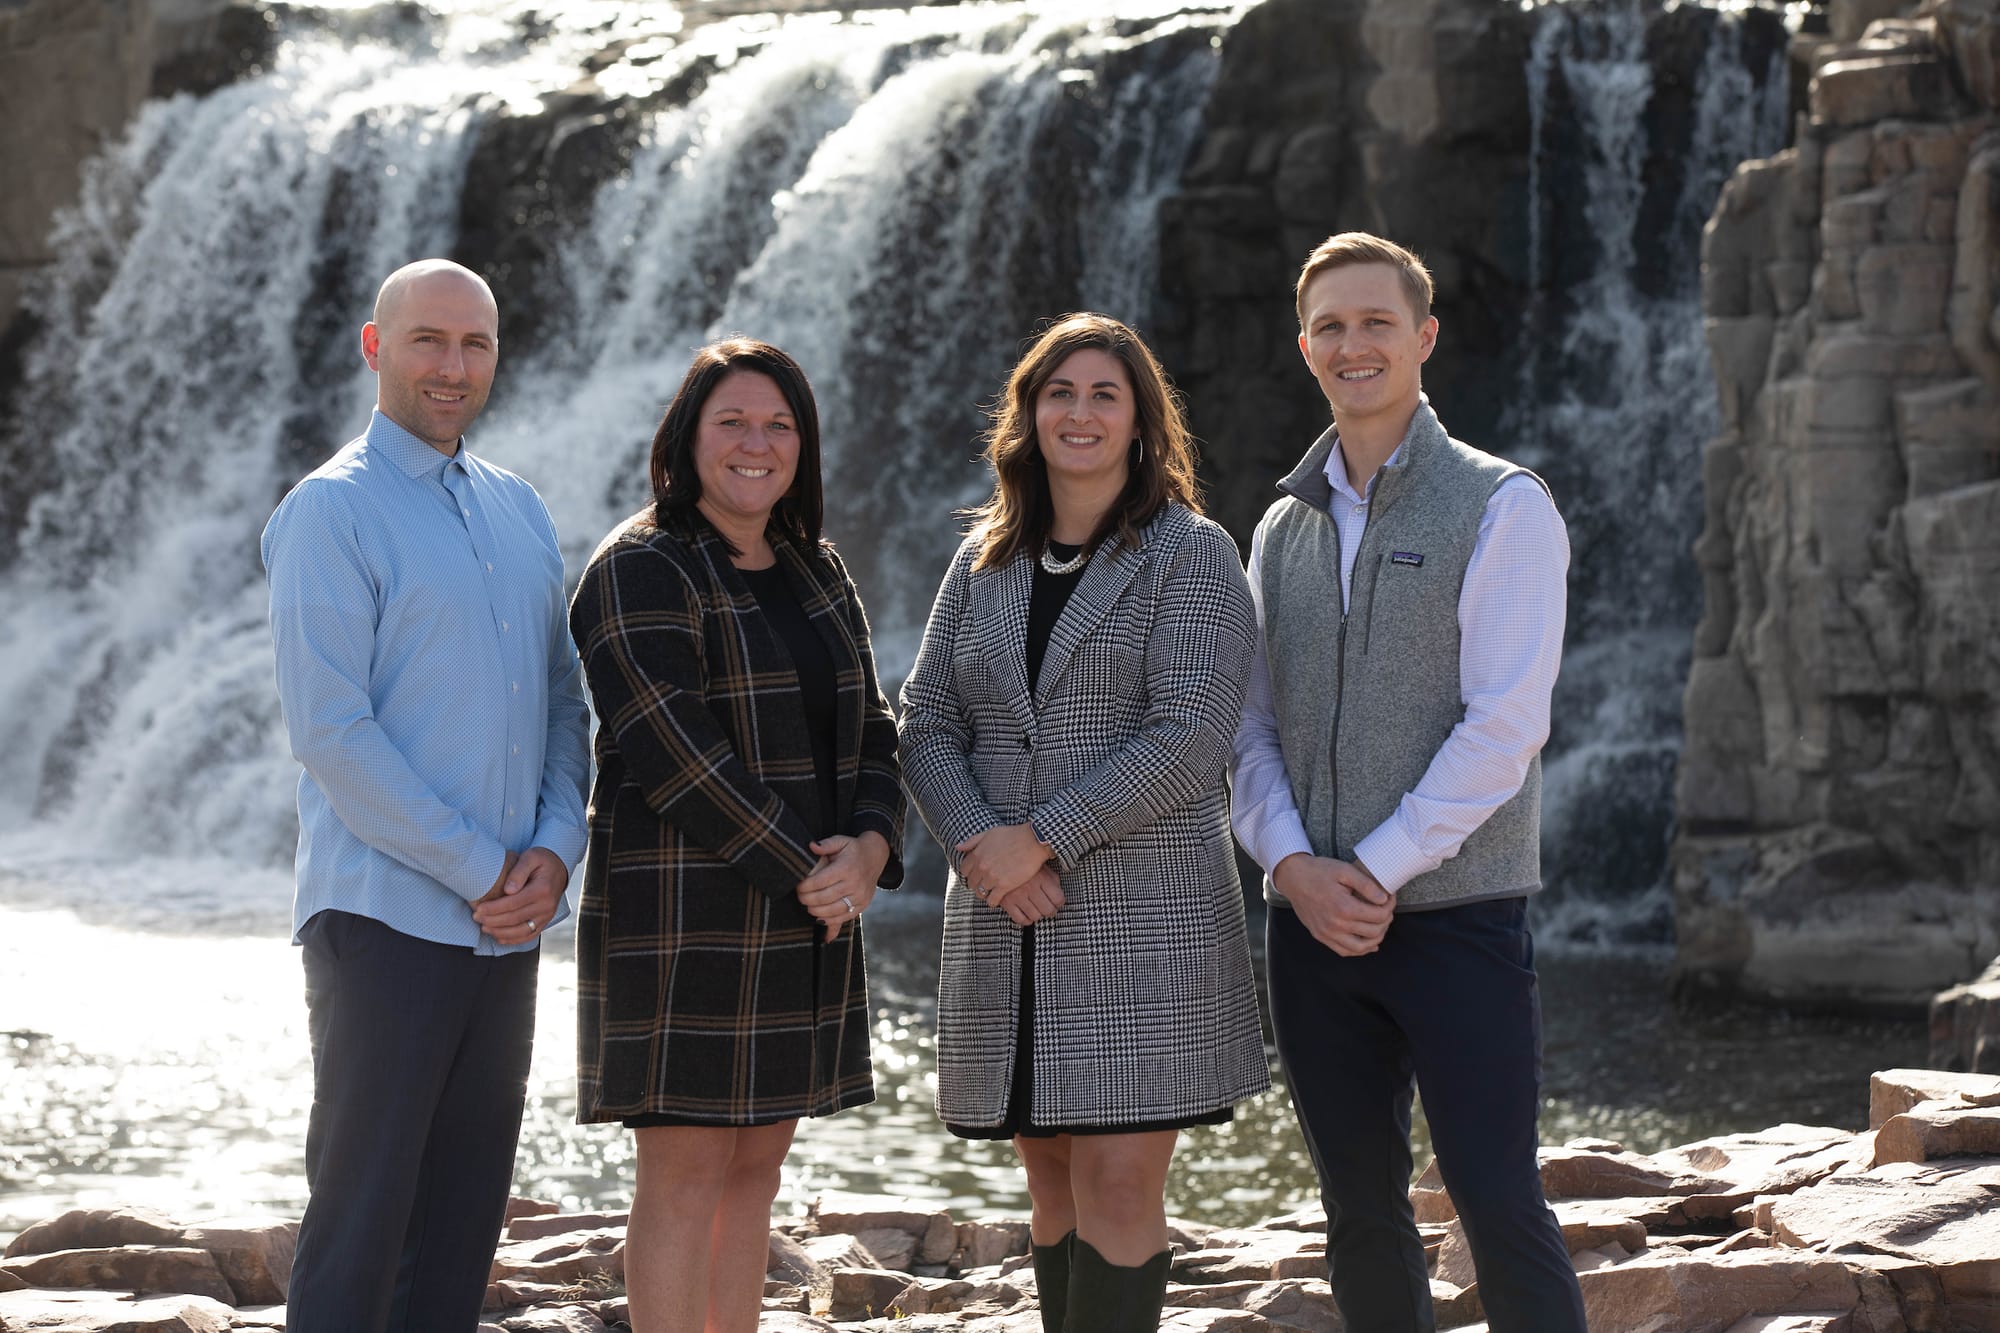 Meet these award-winning young real estate agents in Sioux Falls